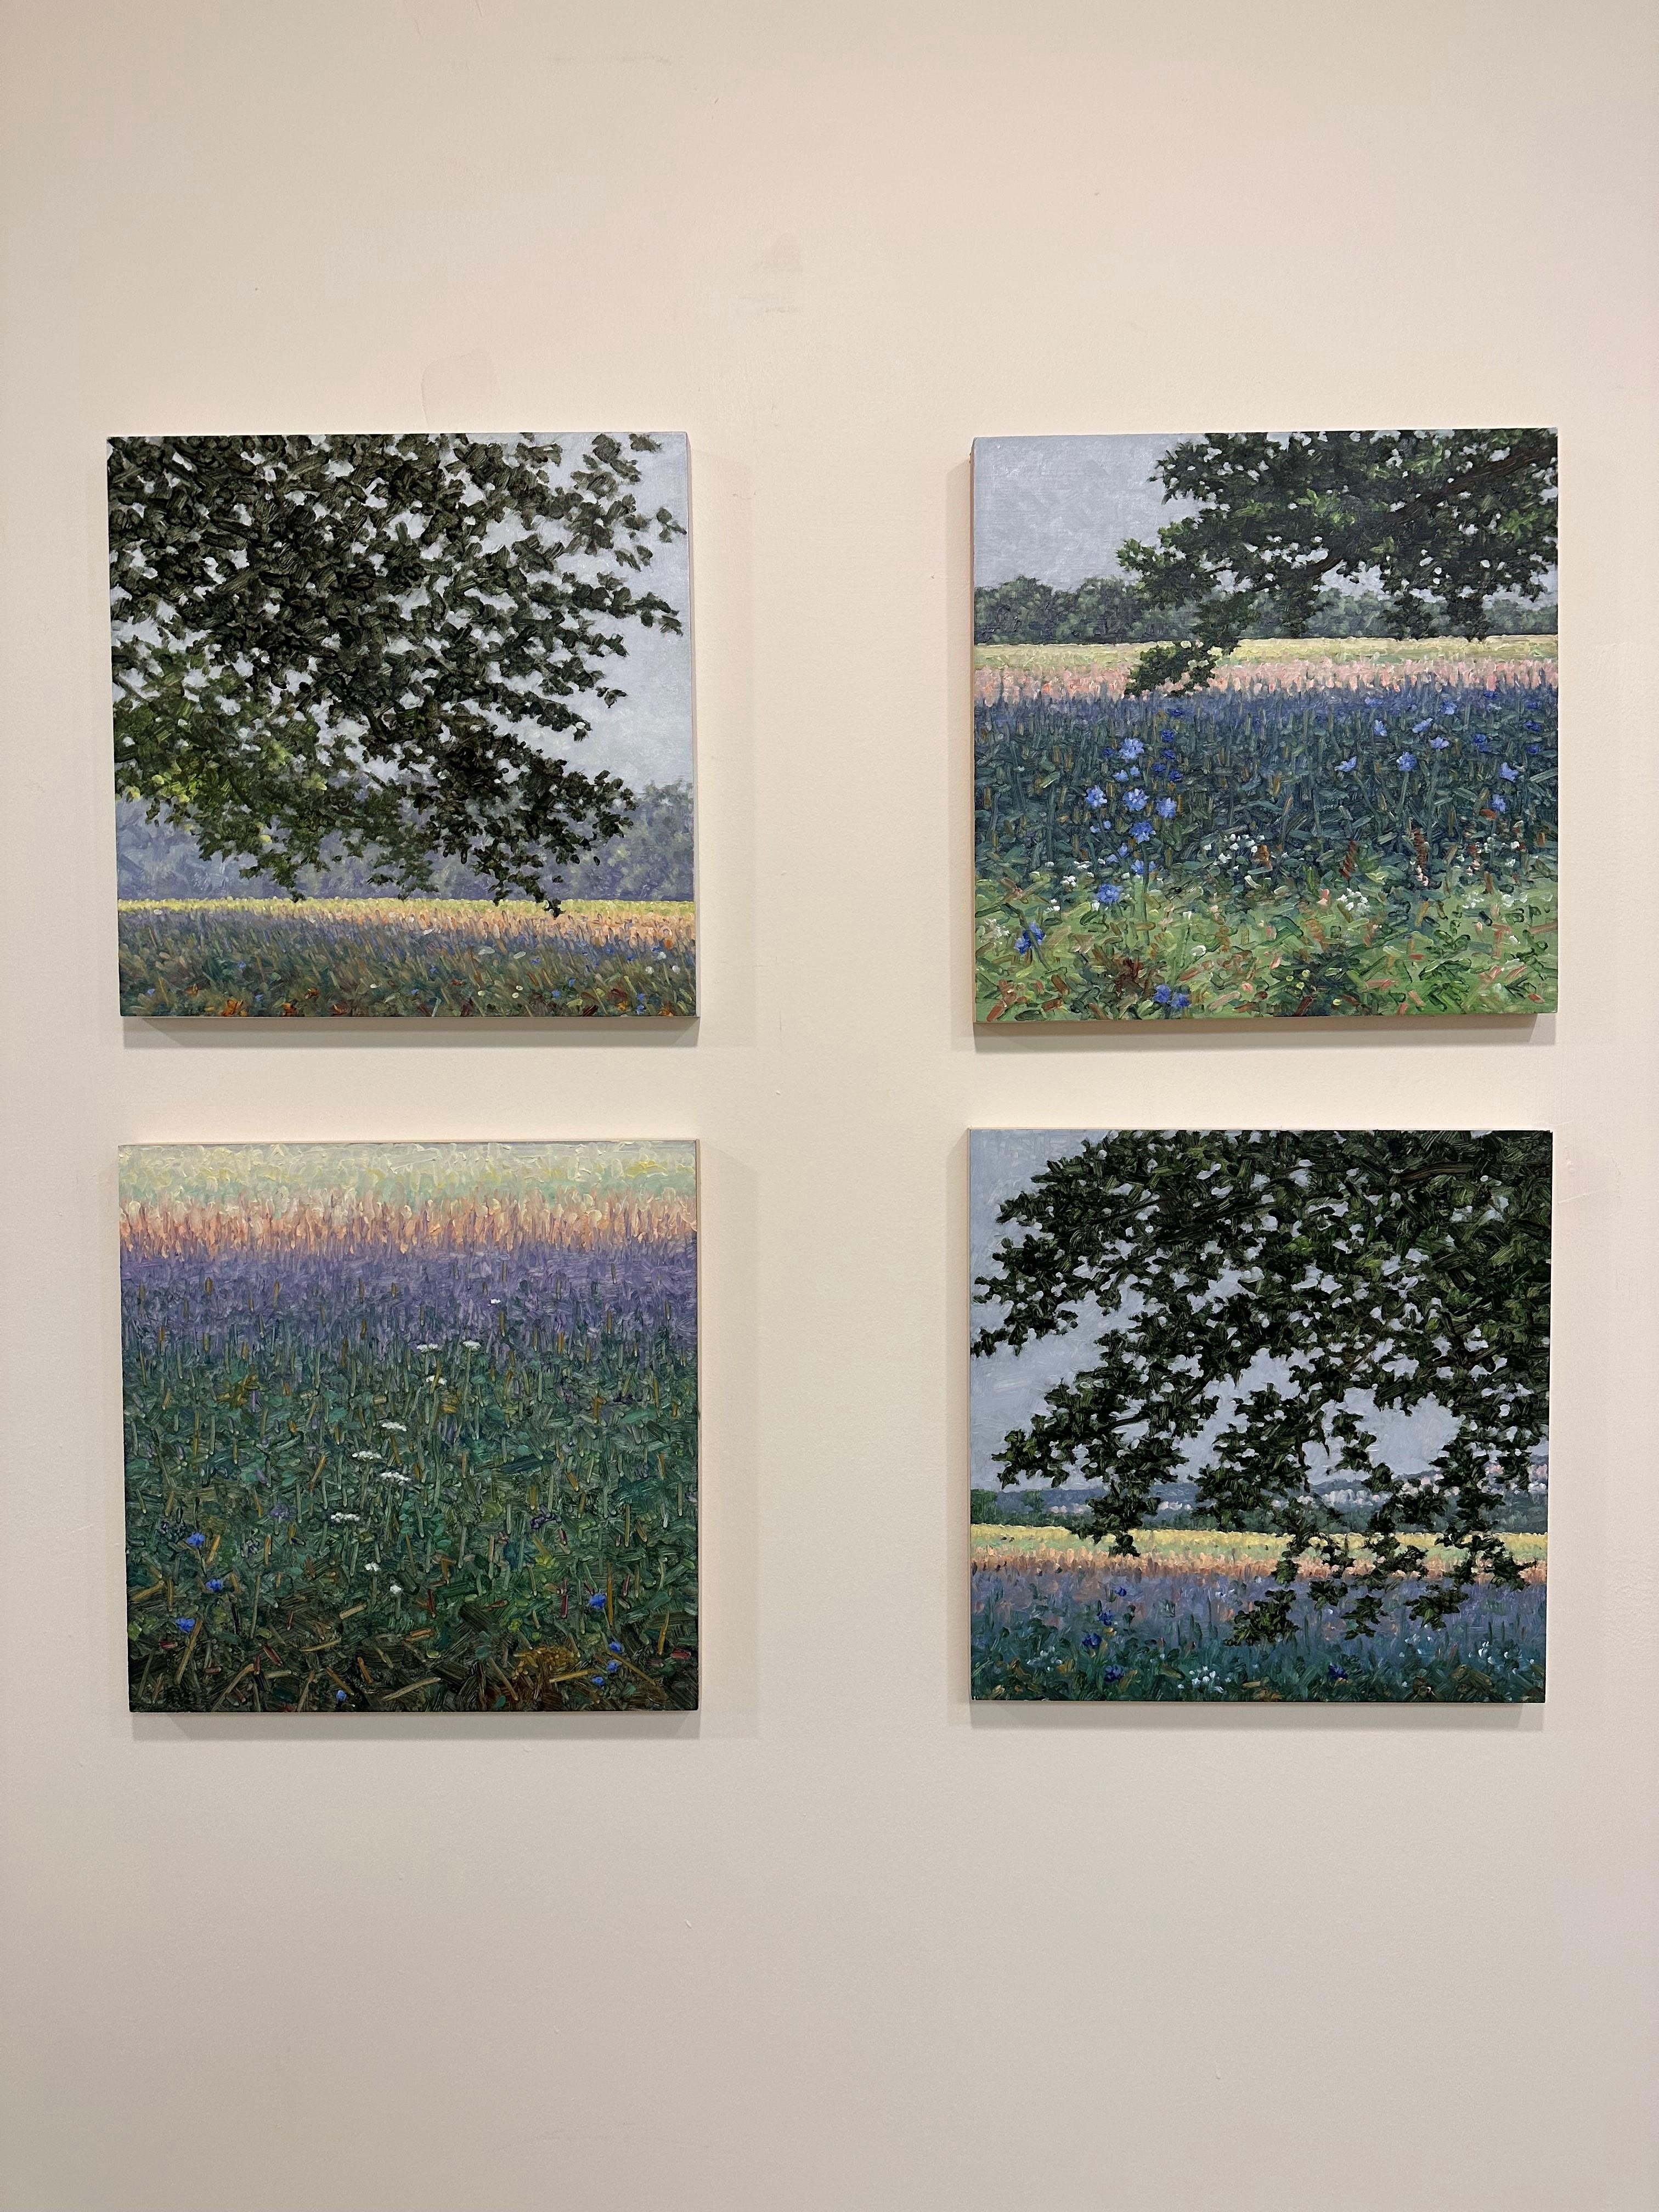 A peaceful outdoor scene in summer of delicately painted lavender and violet blue flowers in a grassy field beneath a tree with dark green leaves, beautifully capturing the idyllic feel of a field of wildflowers in early July. Signed, dated and